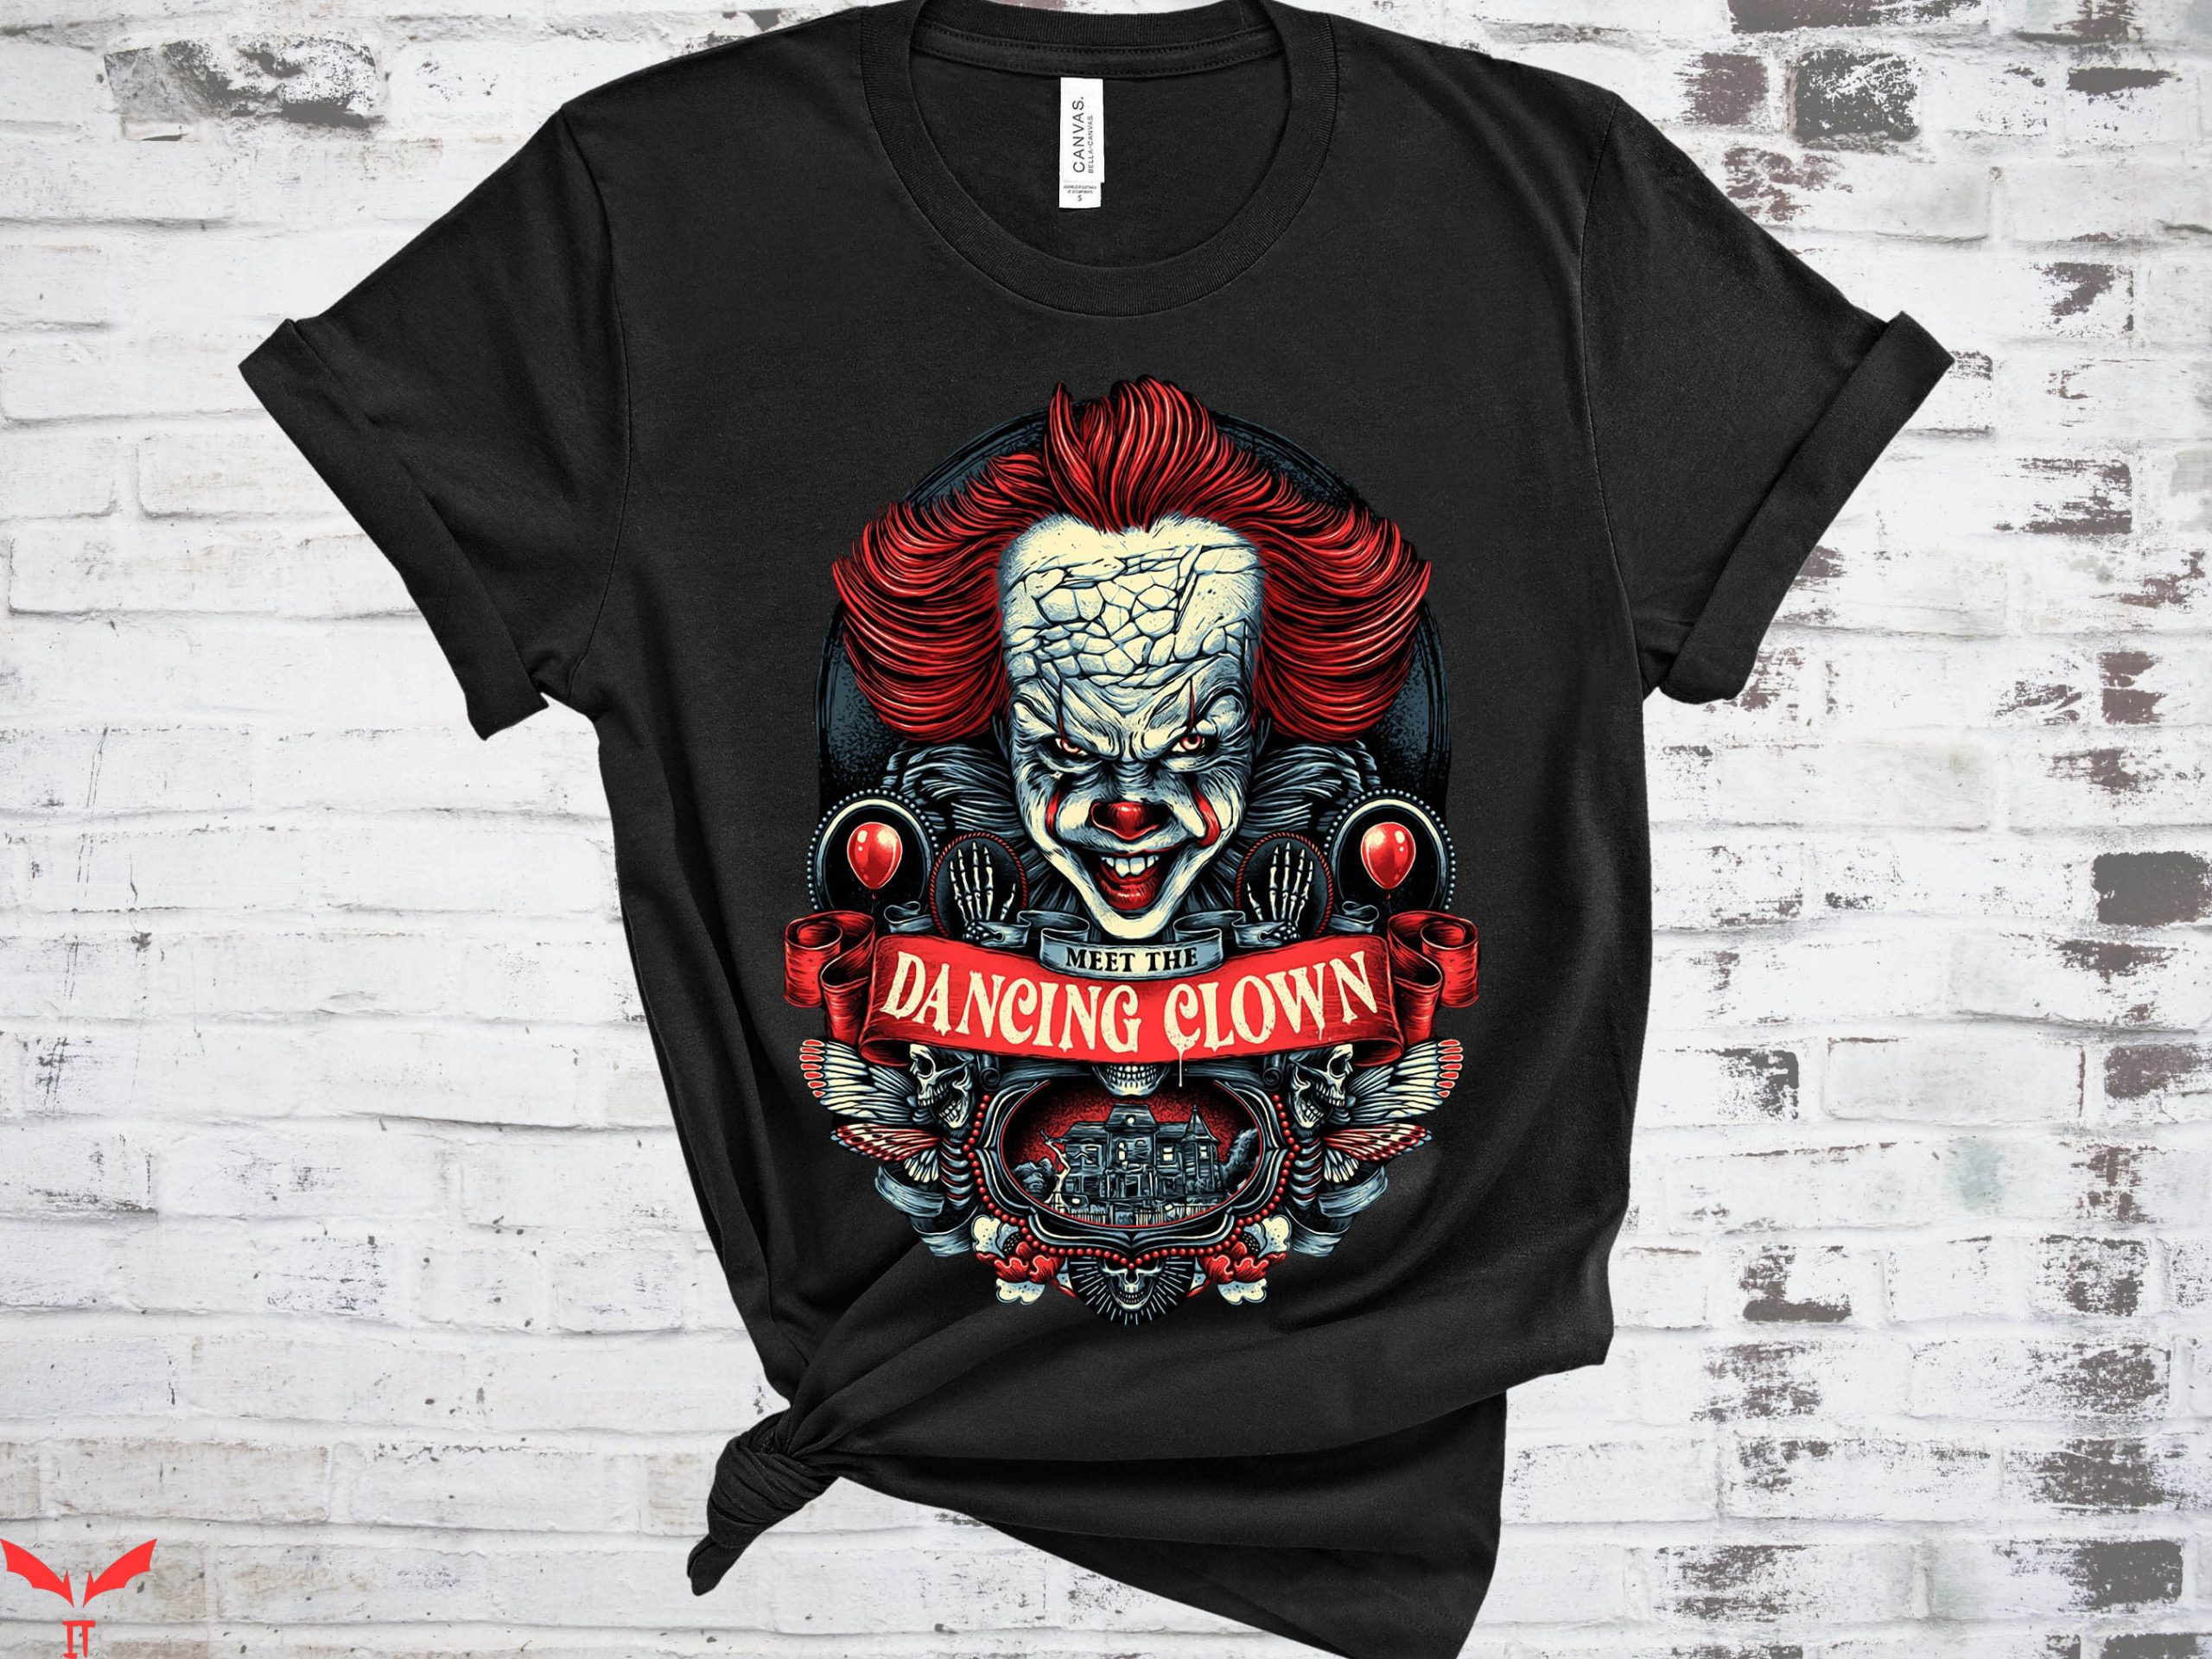 IT The Clown T-Shirt Pennywise Meet The Dancing Clown